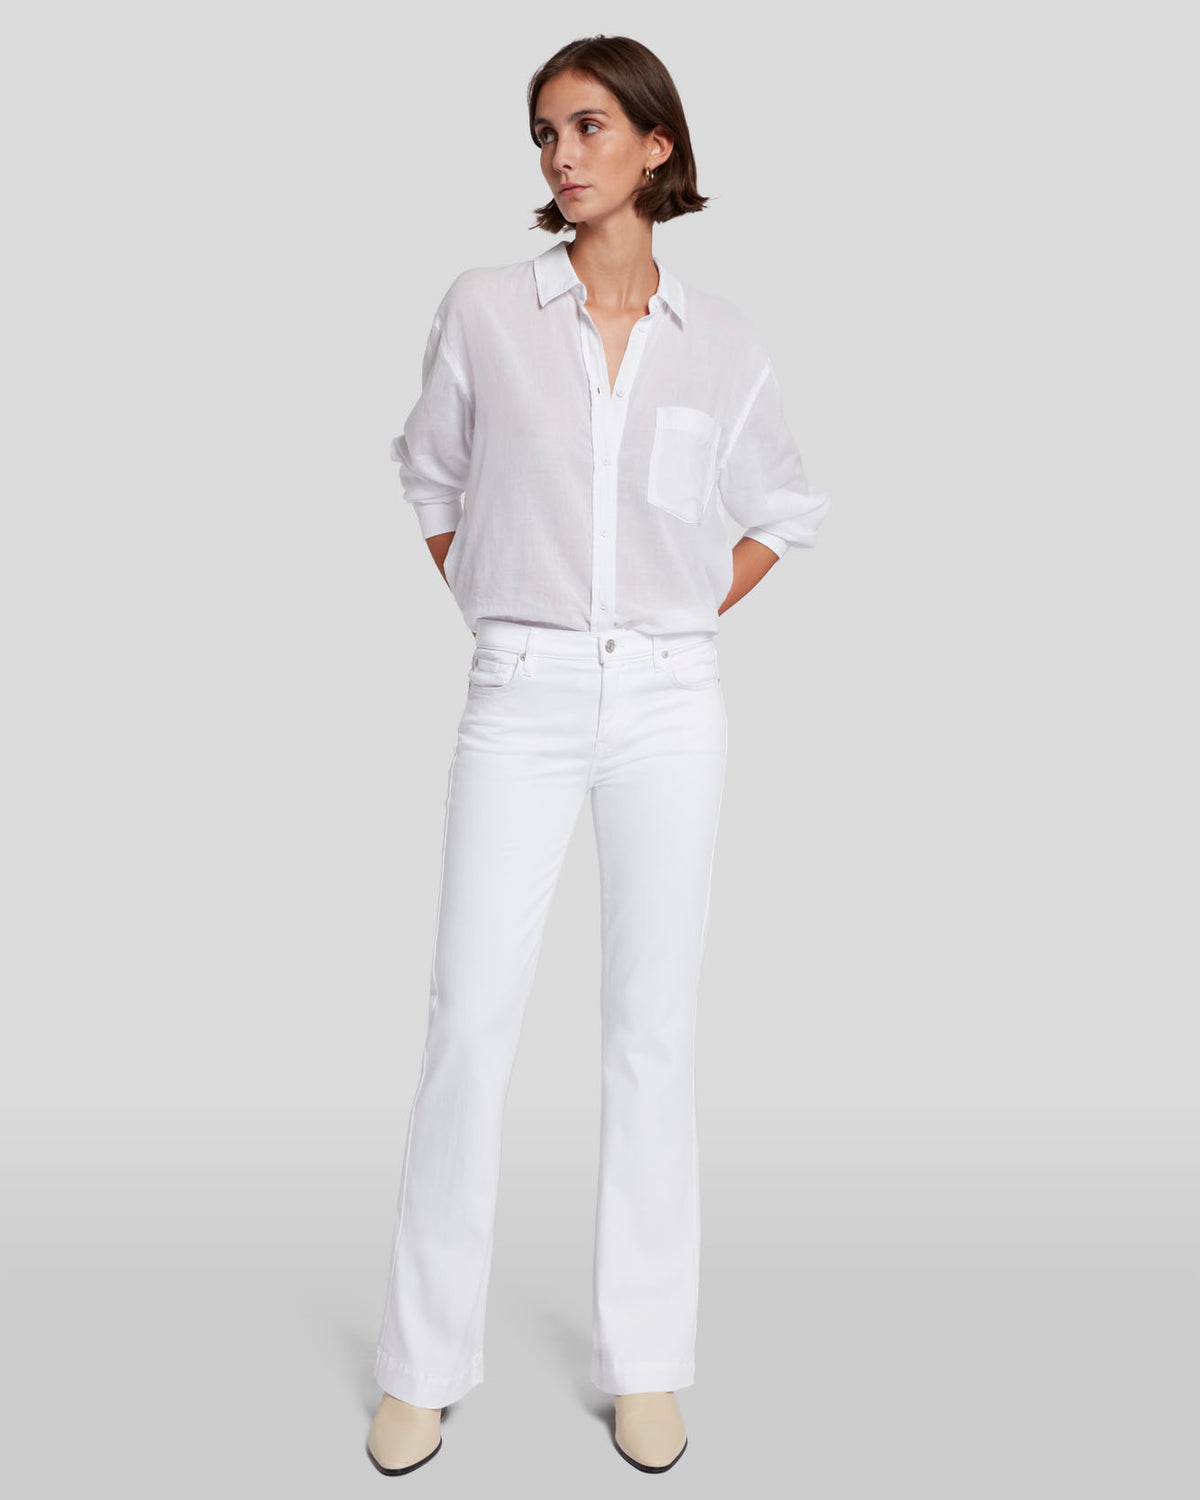 7 For All Mankind Dojo Tailorless Jean in Luxe White